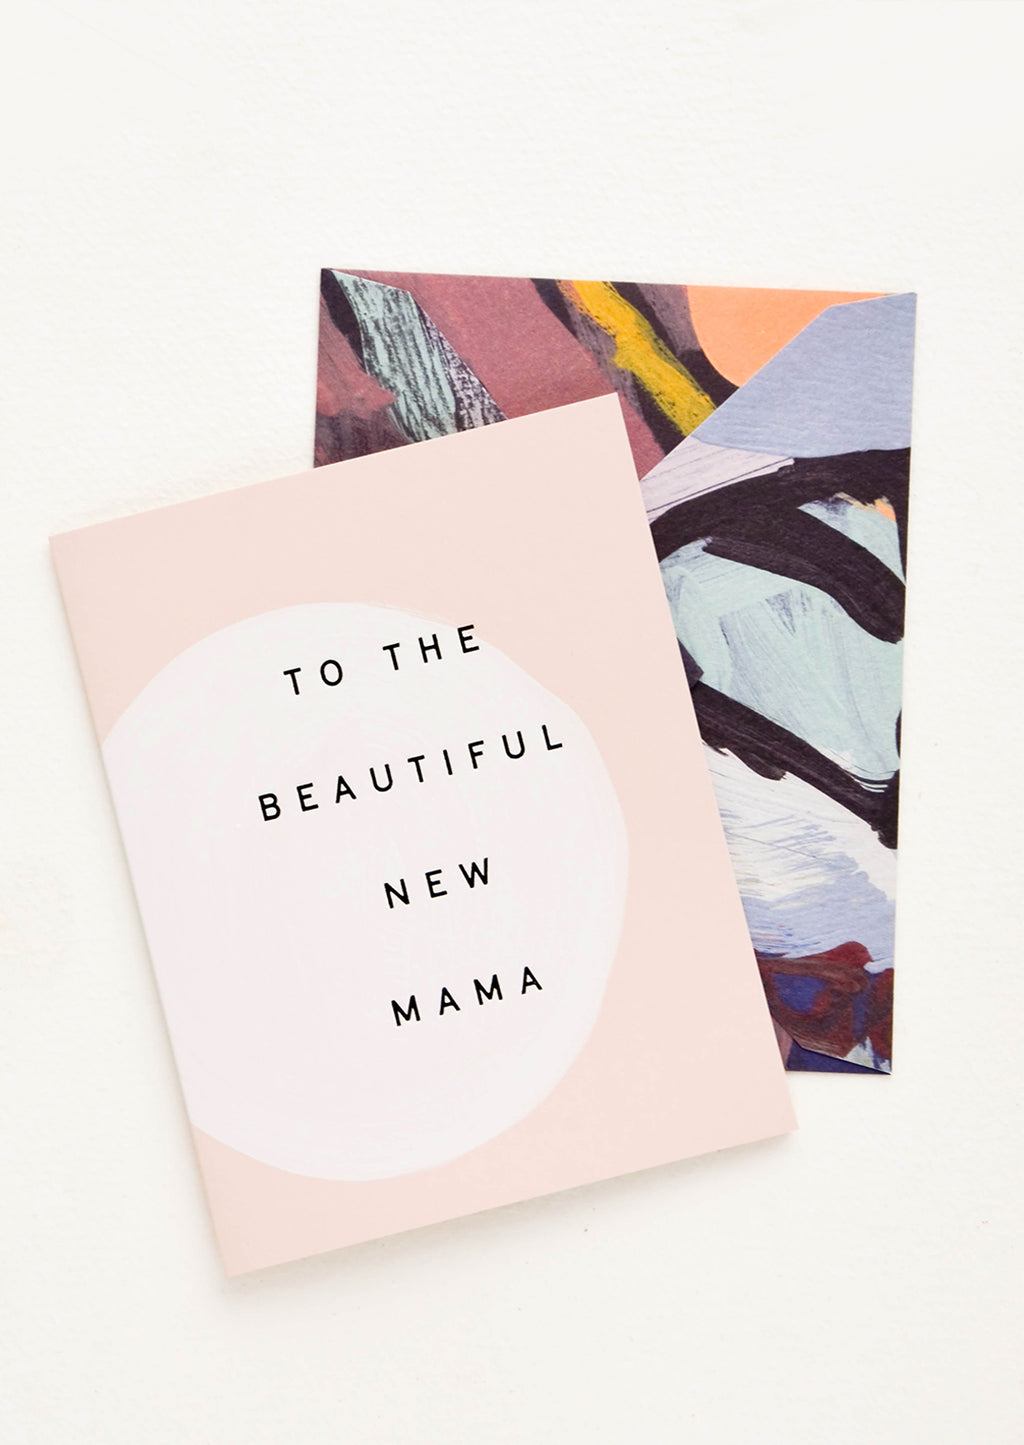 1: Greeting card with hand painted circle and black text reading "To The Beautiful New Mama", paired with abstract printed envelope